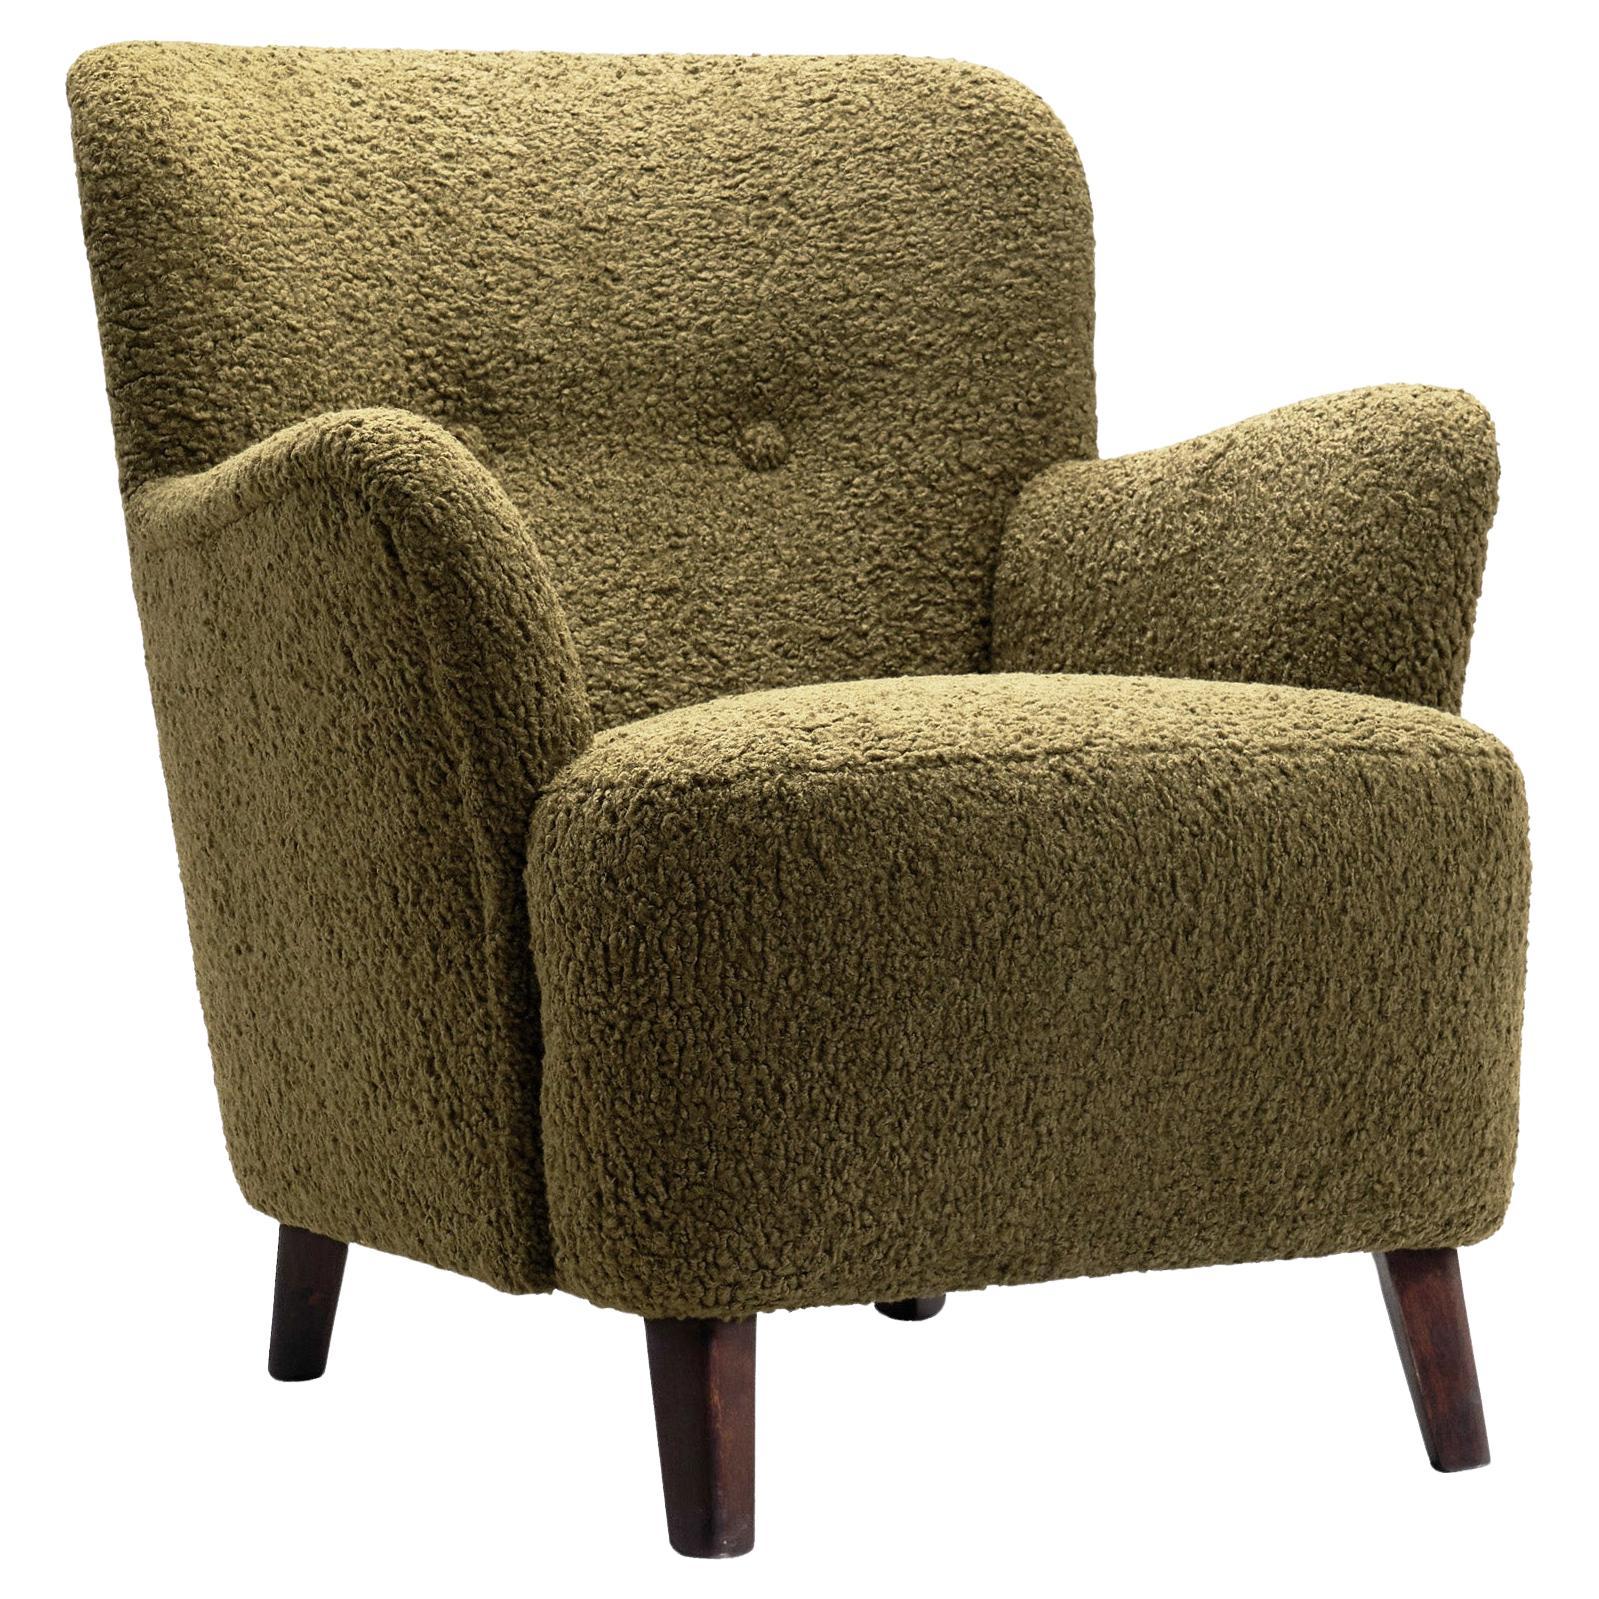 Mid-Century Upholstered Olive Green Armchair, Europe Mid 20th Century For Sale